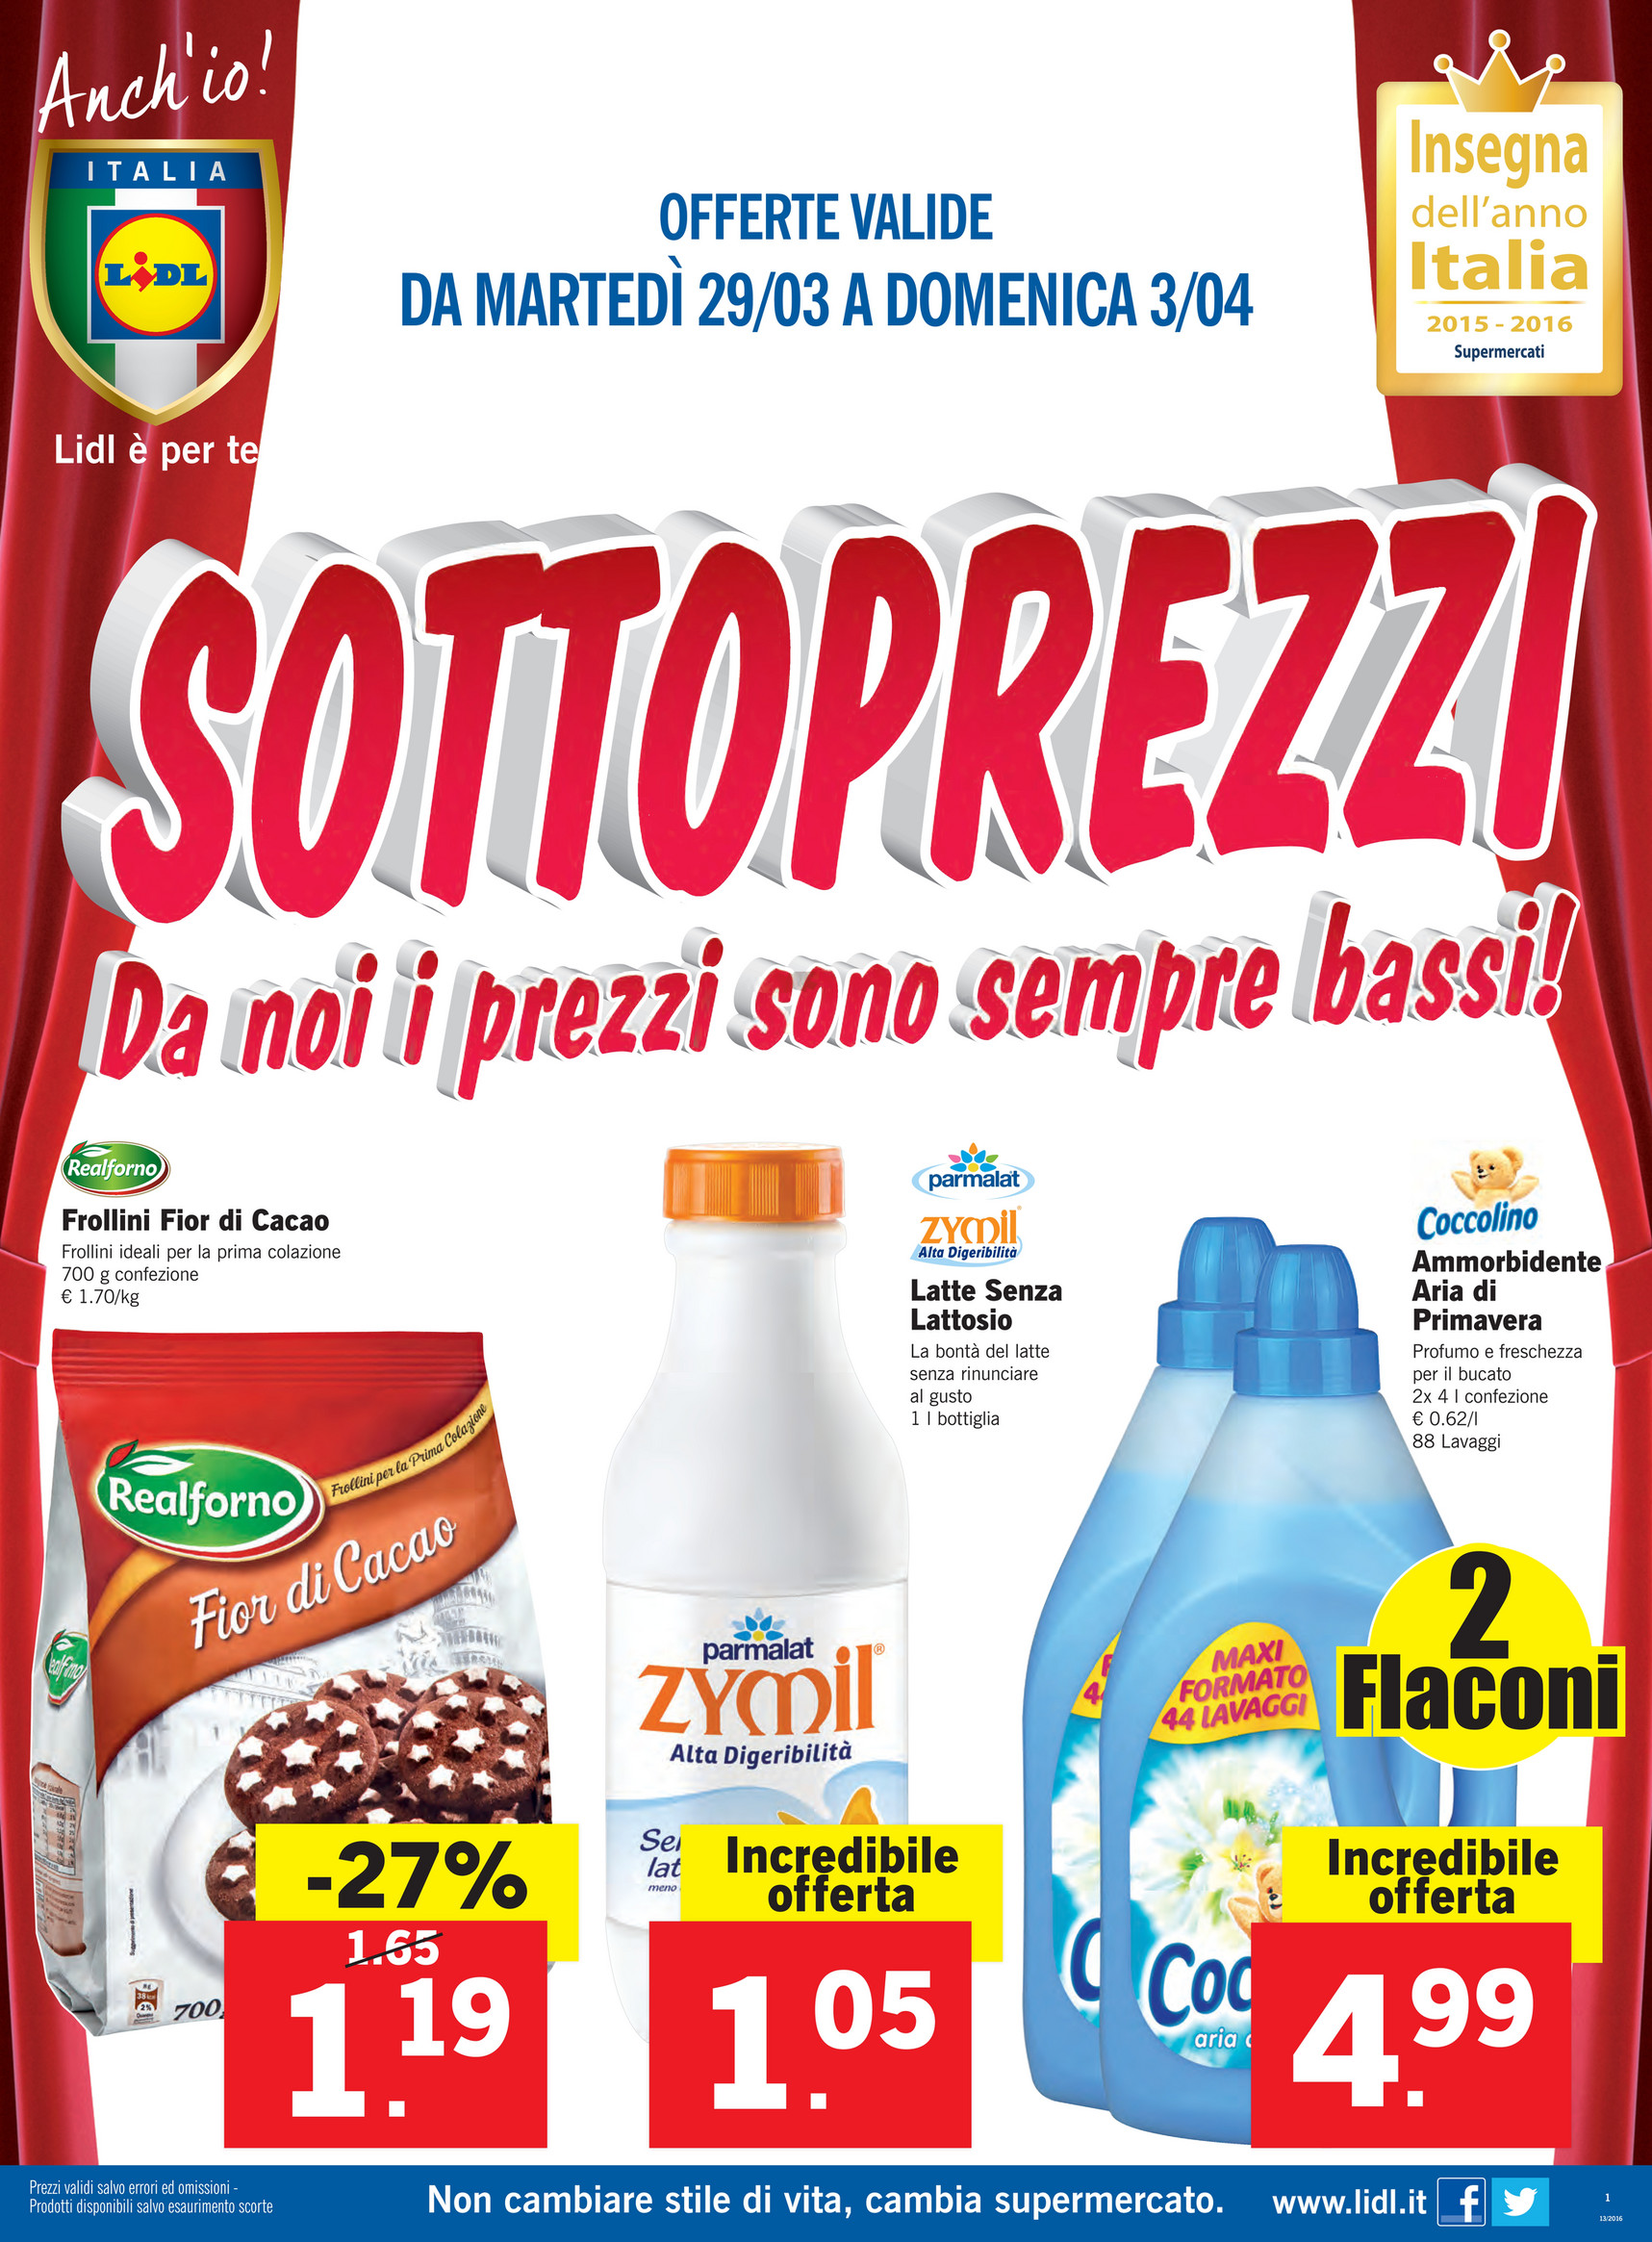 SP - Volantino Lidl - Sottoprezzi - Page 1 - Created with Publitas.com